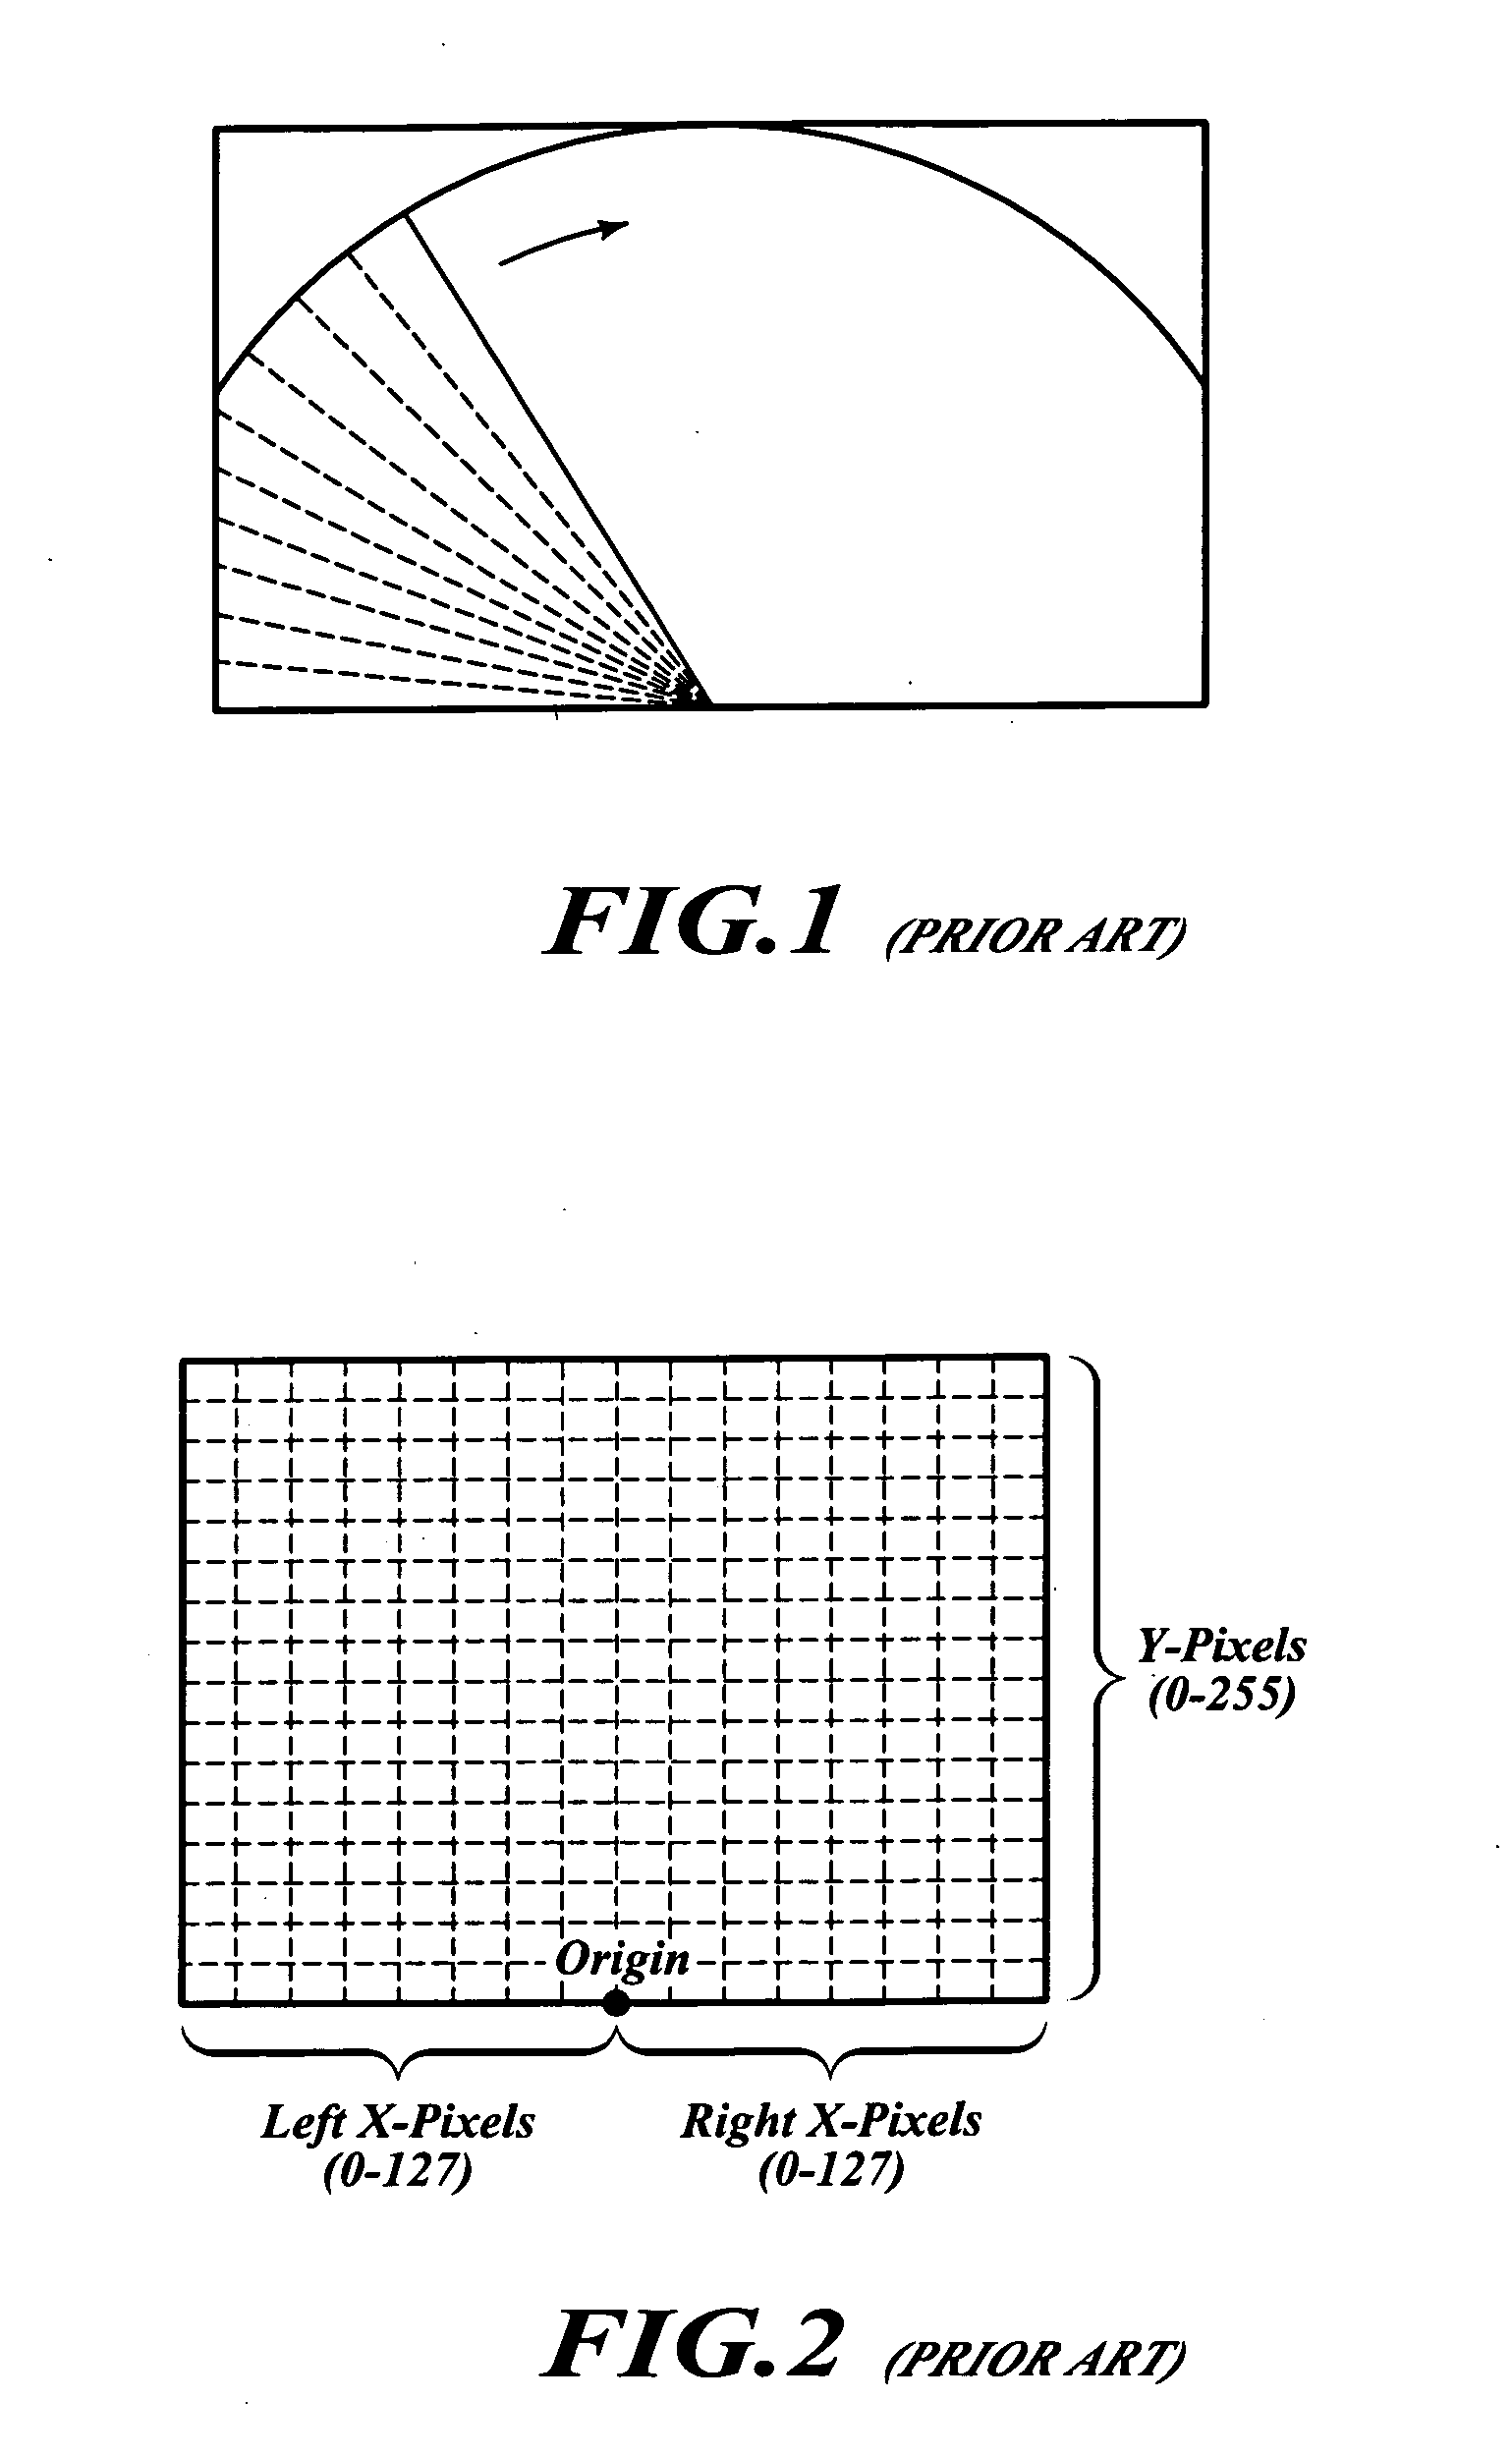 Systems and methods for rapid updating of embedded text in radar picture data